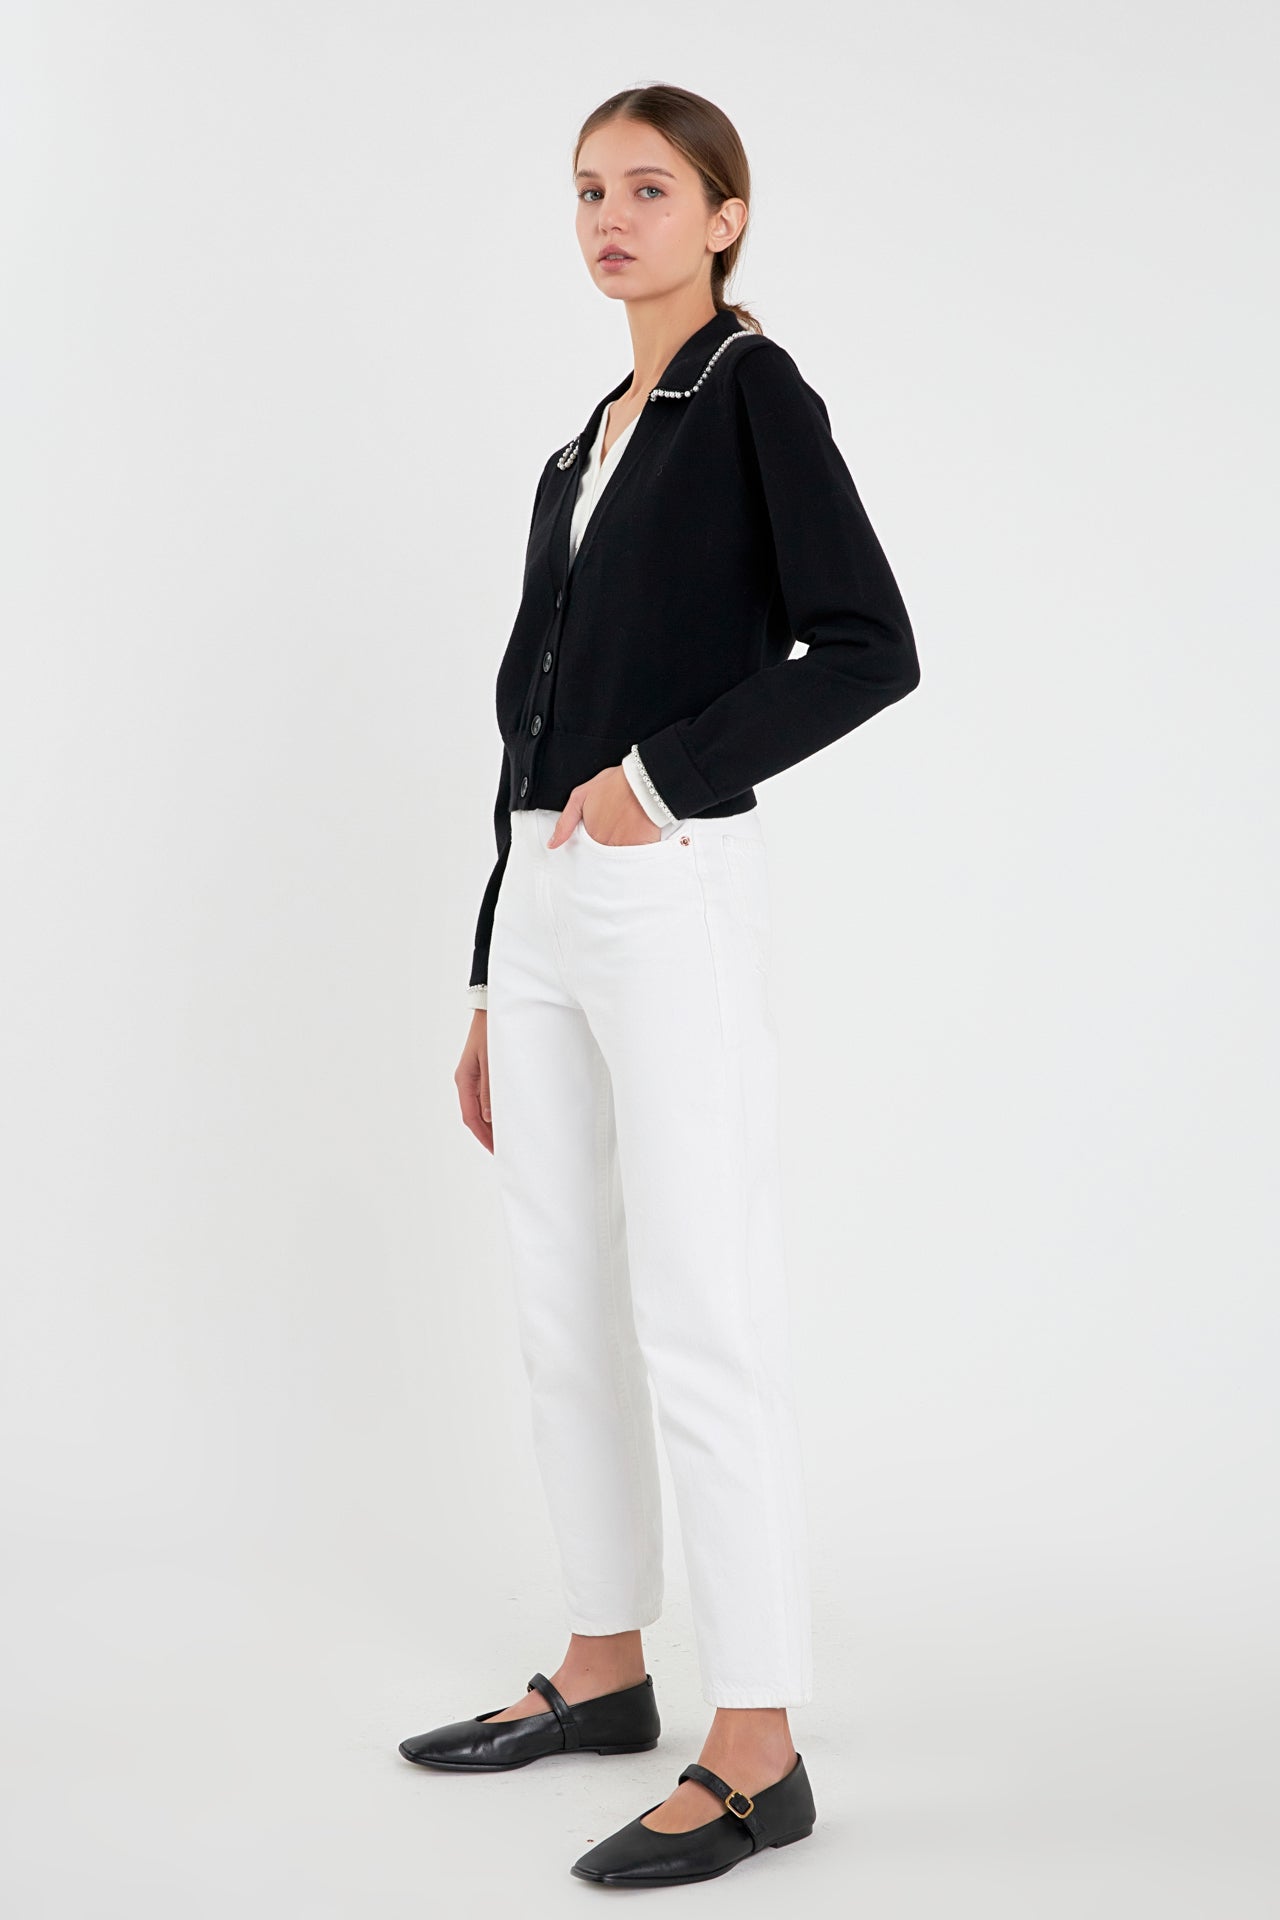 ENGLISH FACTORY - Pearl Trim Vasity Cardigan - JACKETS available at Objectrare